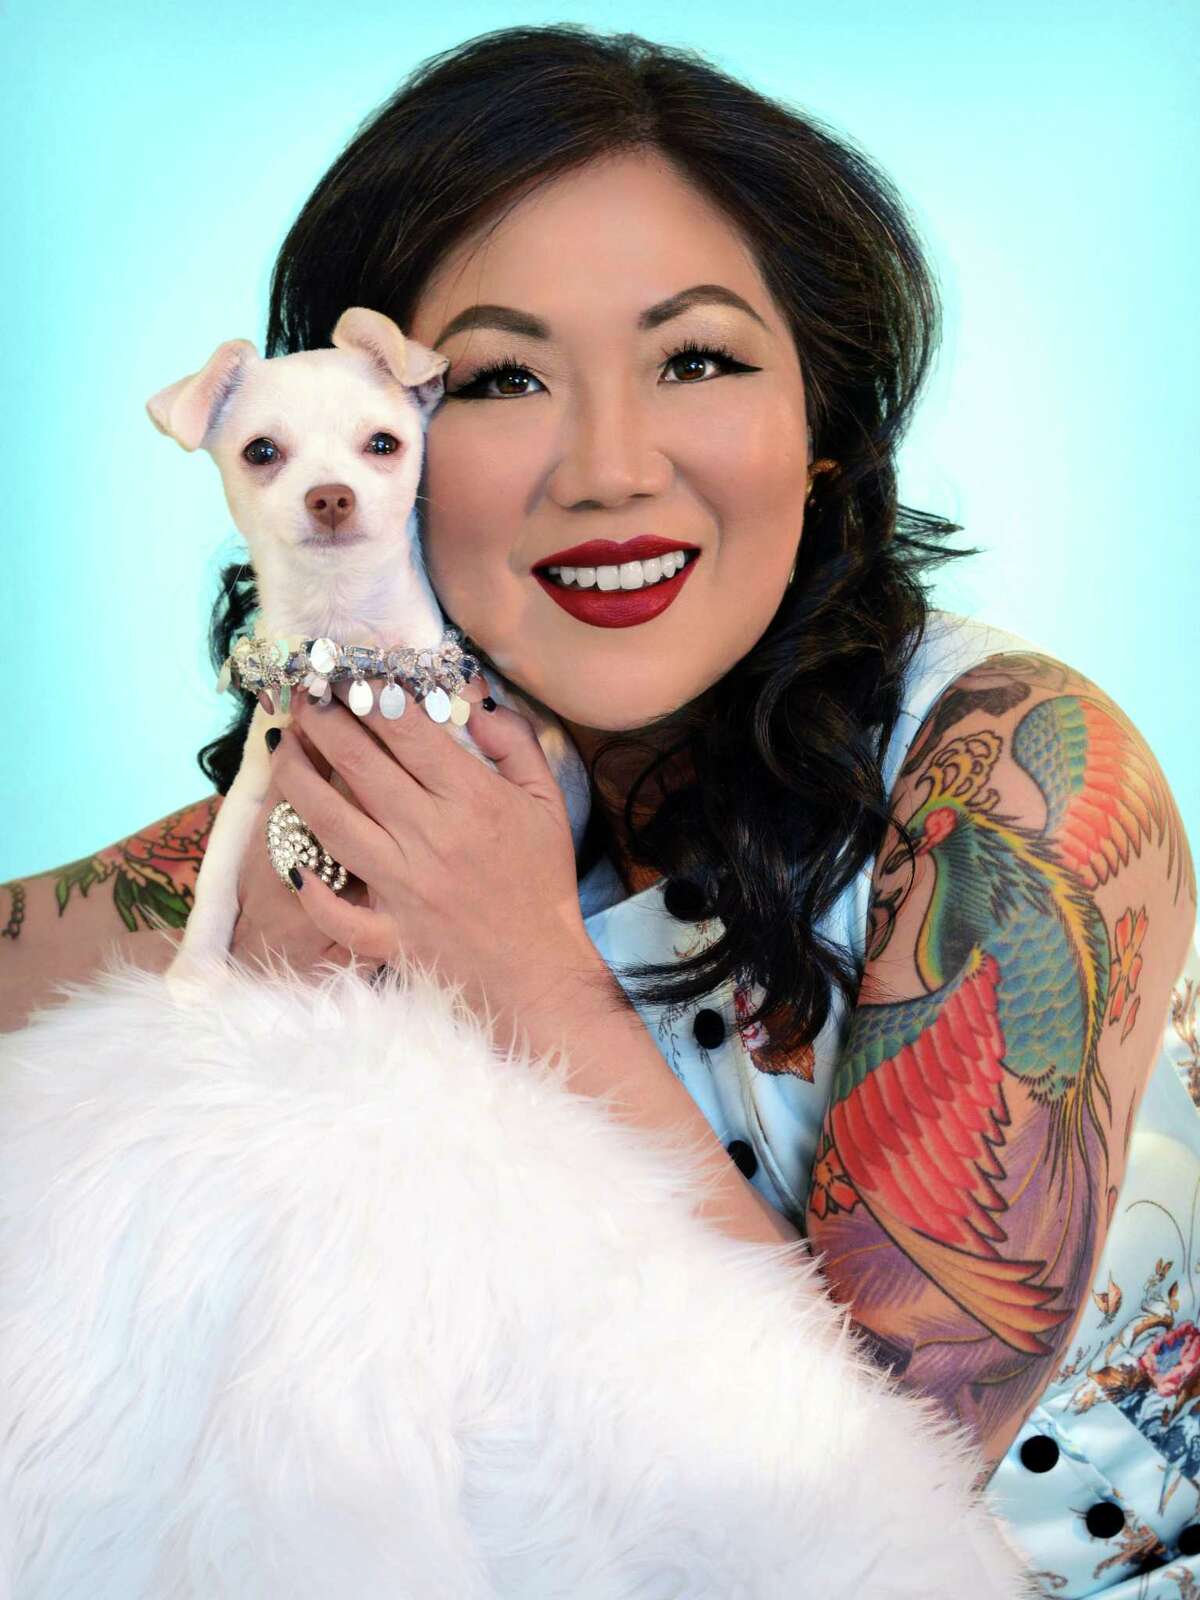 Margaret Cho brings her comedy to The Ridgefield Playhouse Nov. 